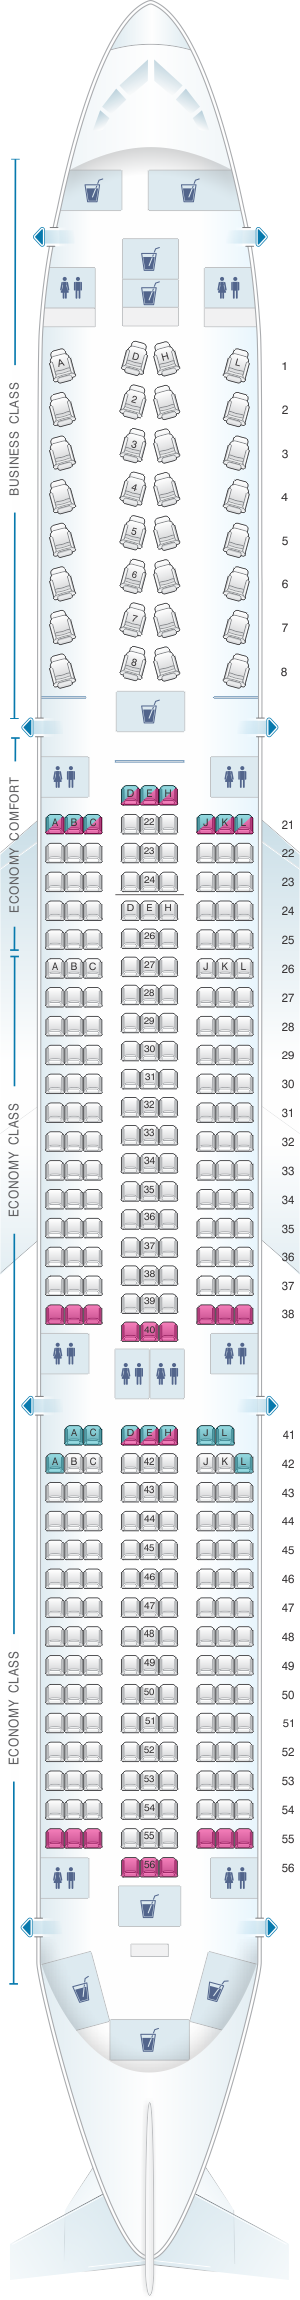 Airbus A350 900 Seat Configuration Image To U